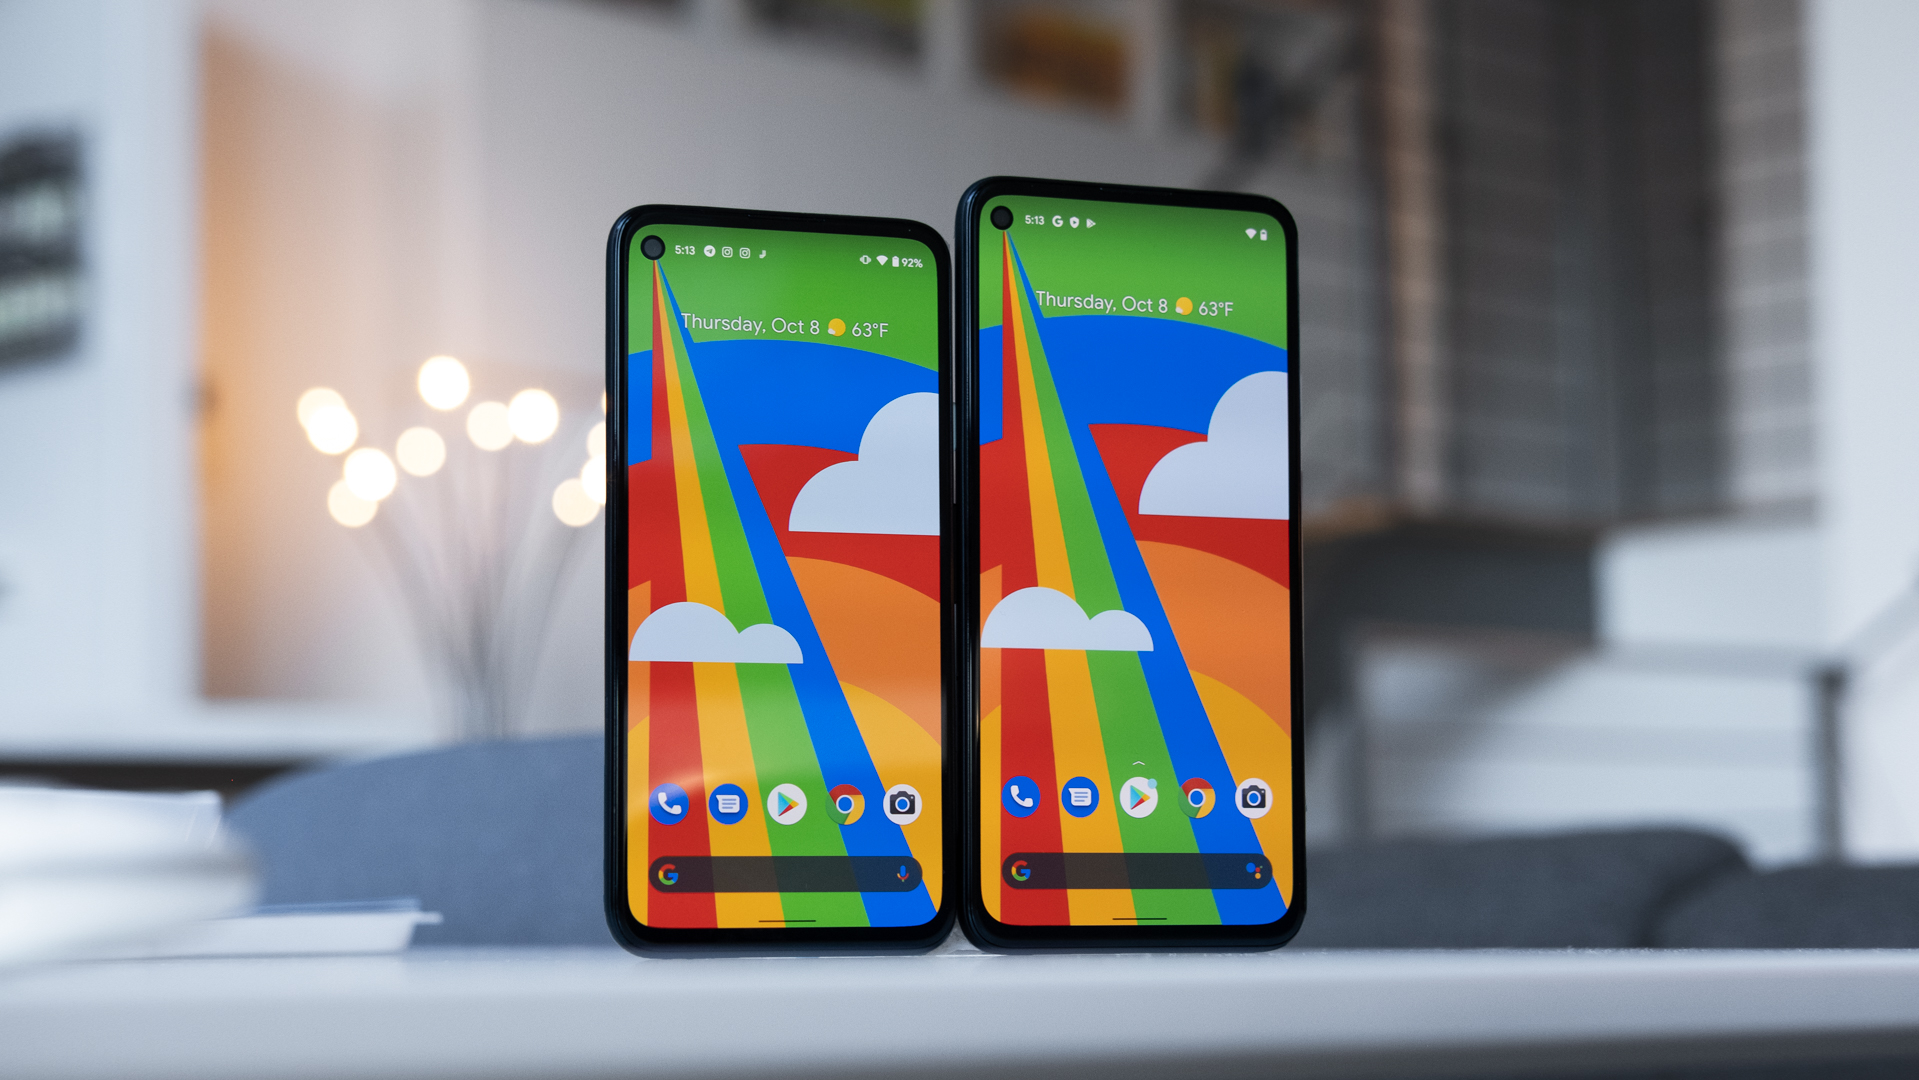 Google Pixel 4a 5g Buyer’s Guide: Know Before You Buy